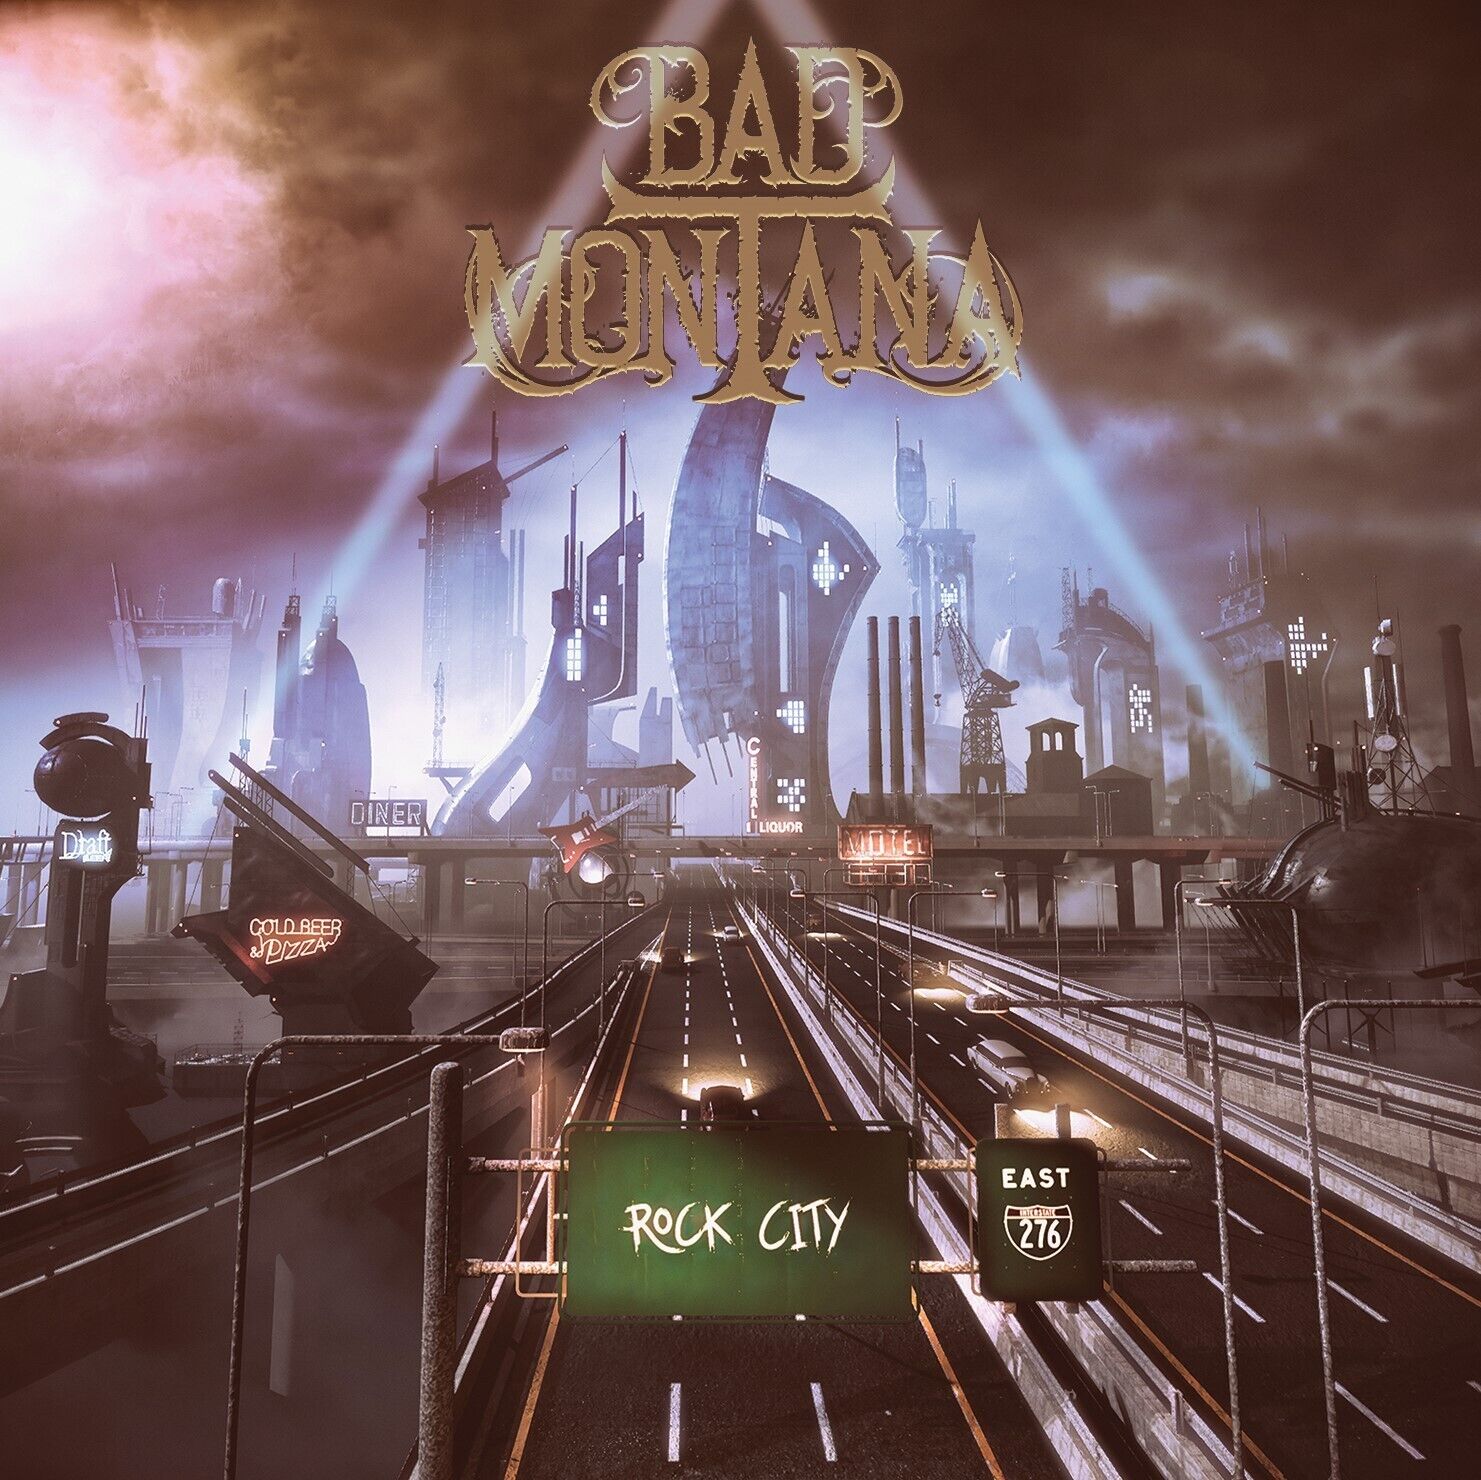 Bad Montana Newest Release ‘Rock City’